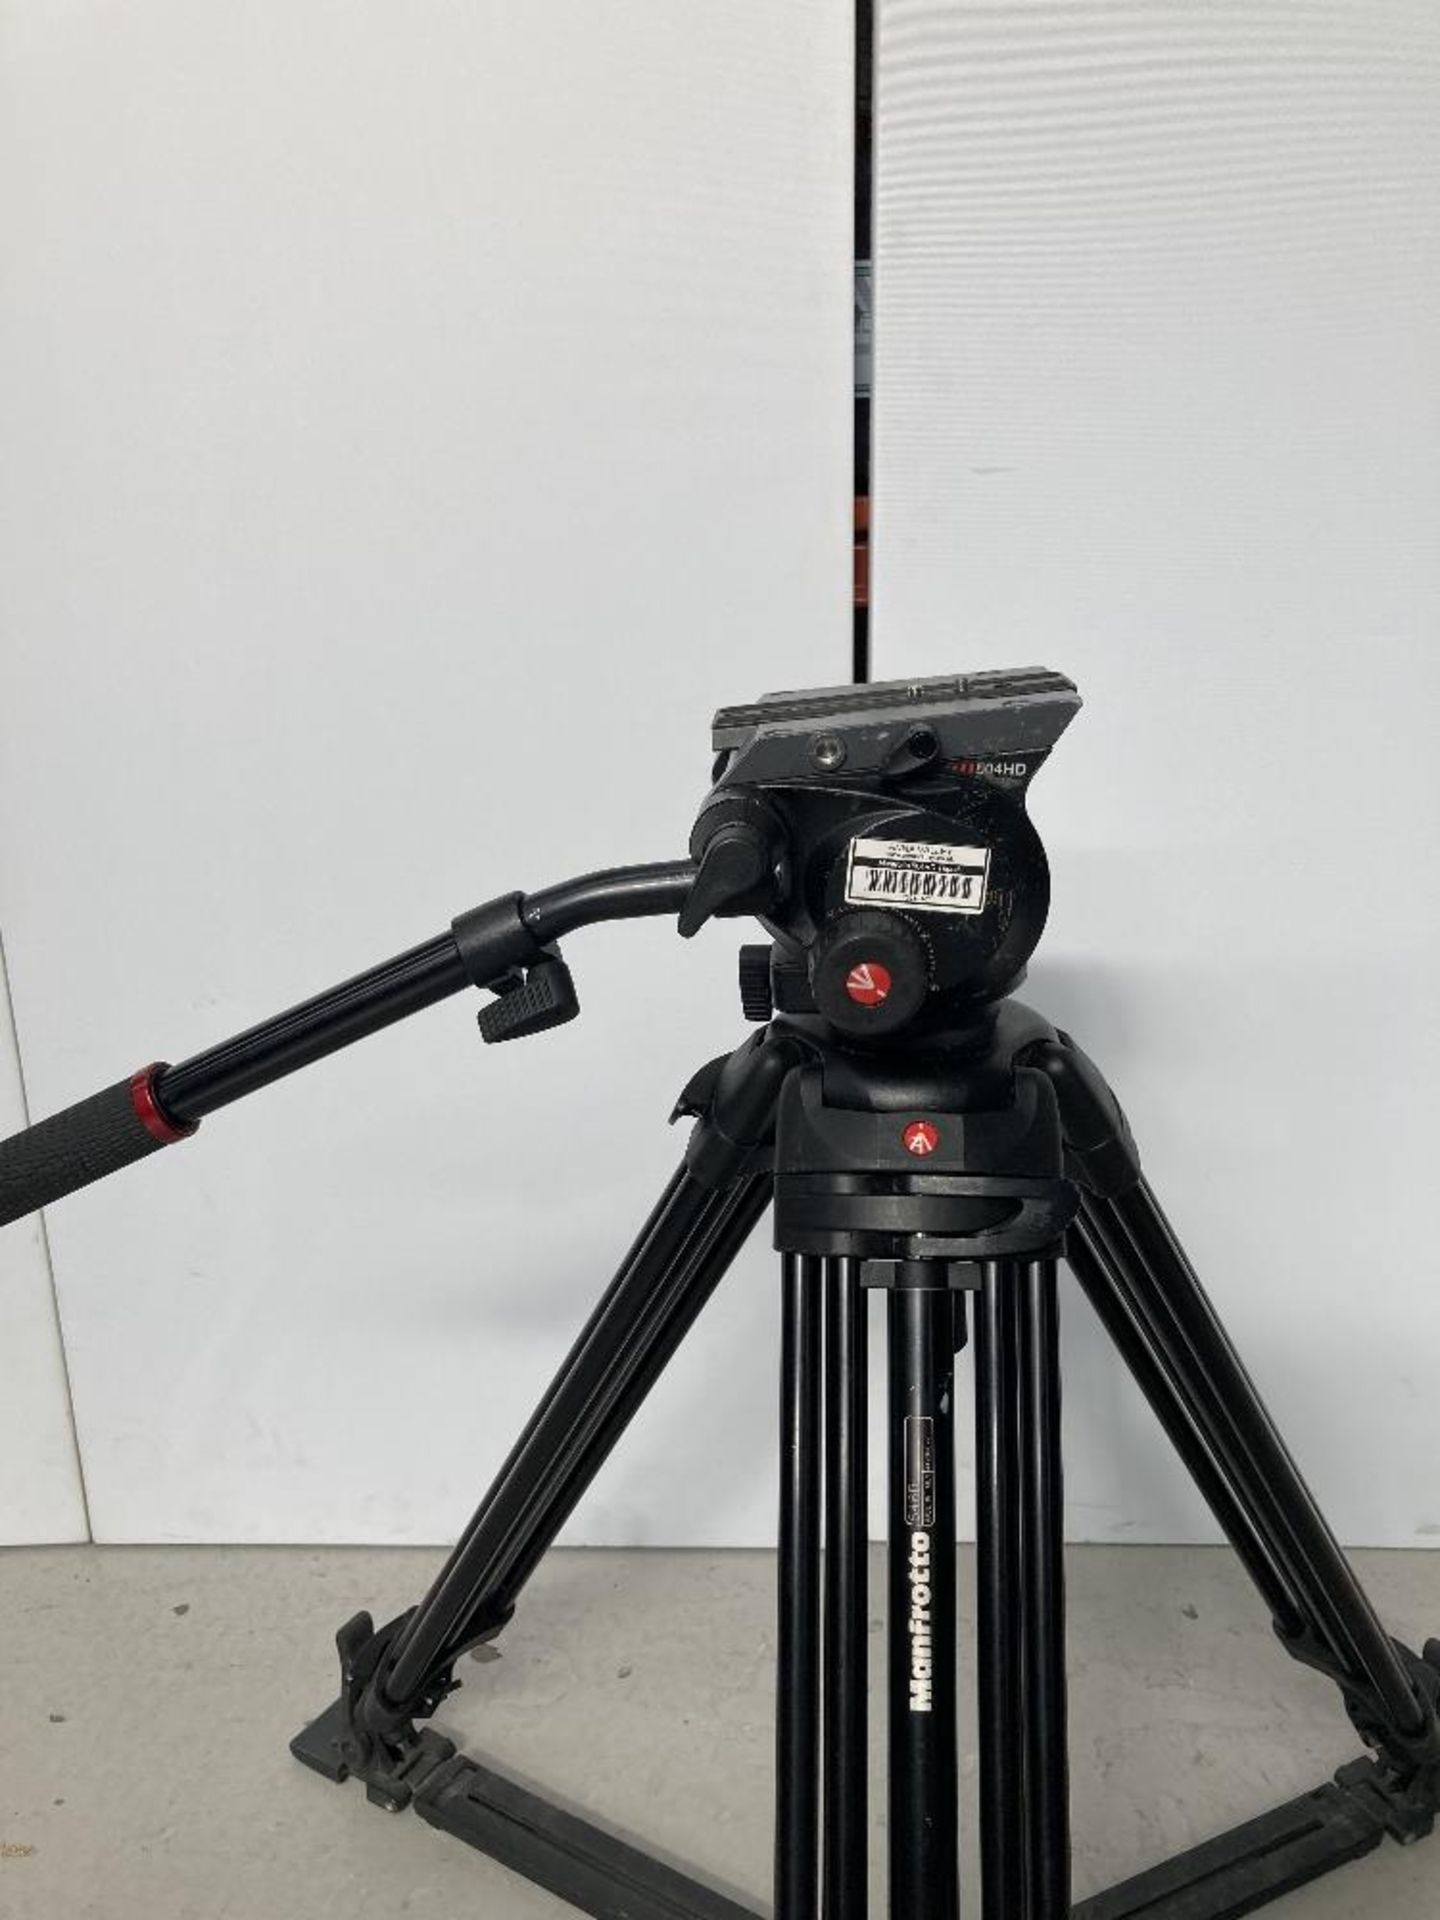 Manfrotto 504HD Tripod Head and 546B Tripod with Carbon Fibre Legs with Manfrotto Carry Case - Image 6 of 7